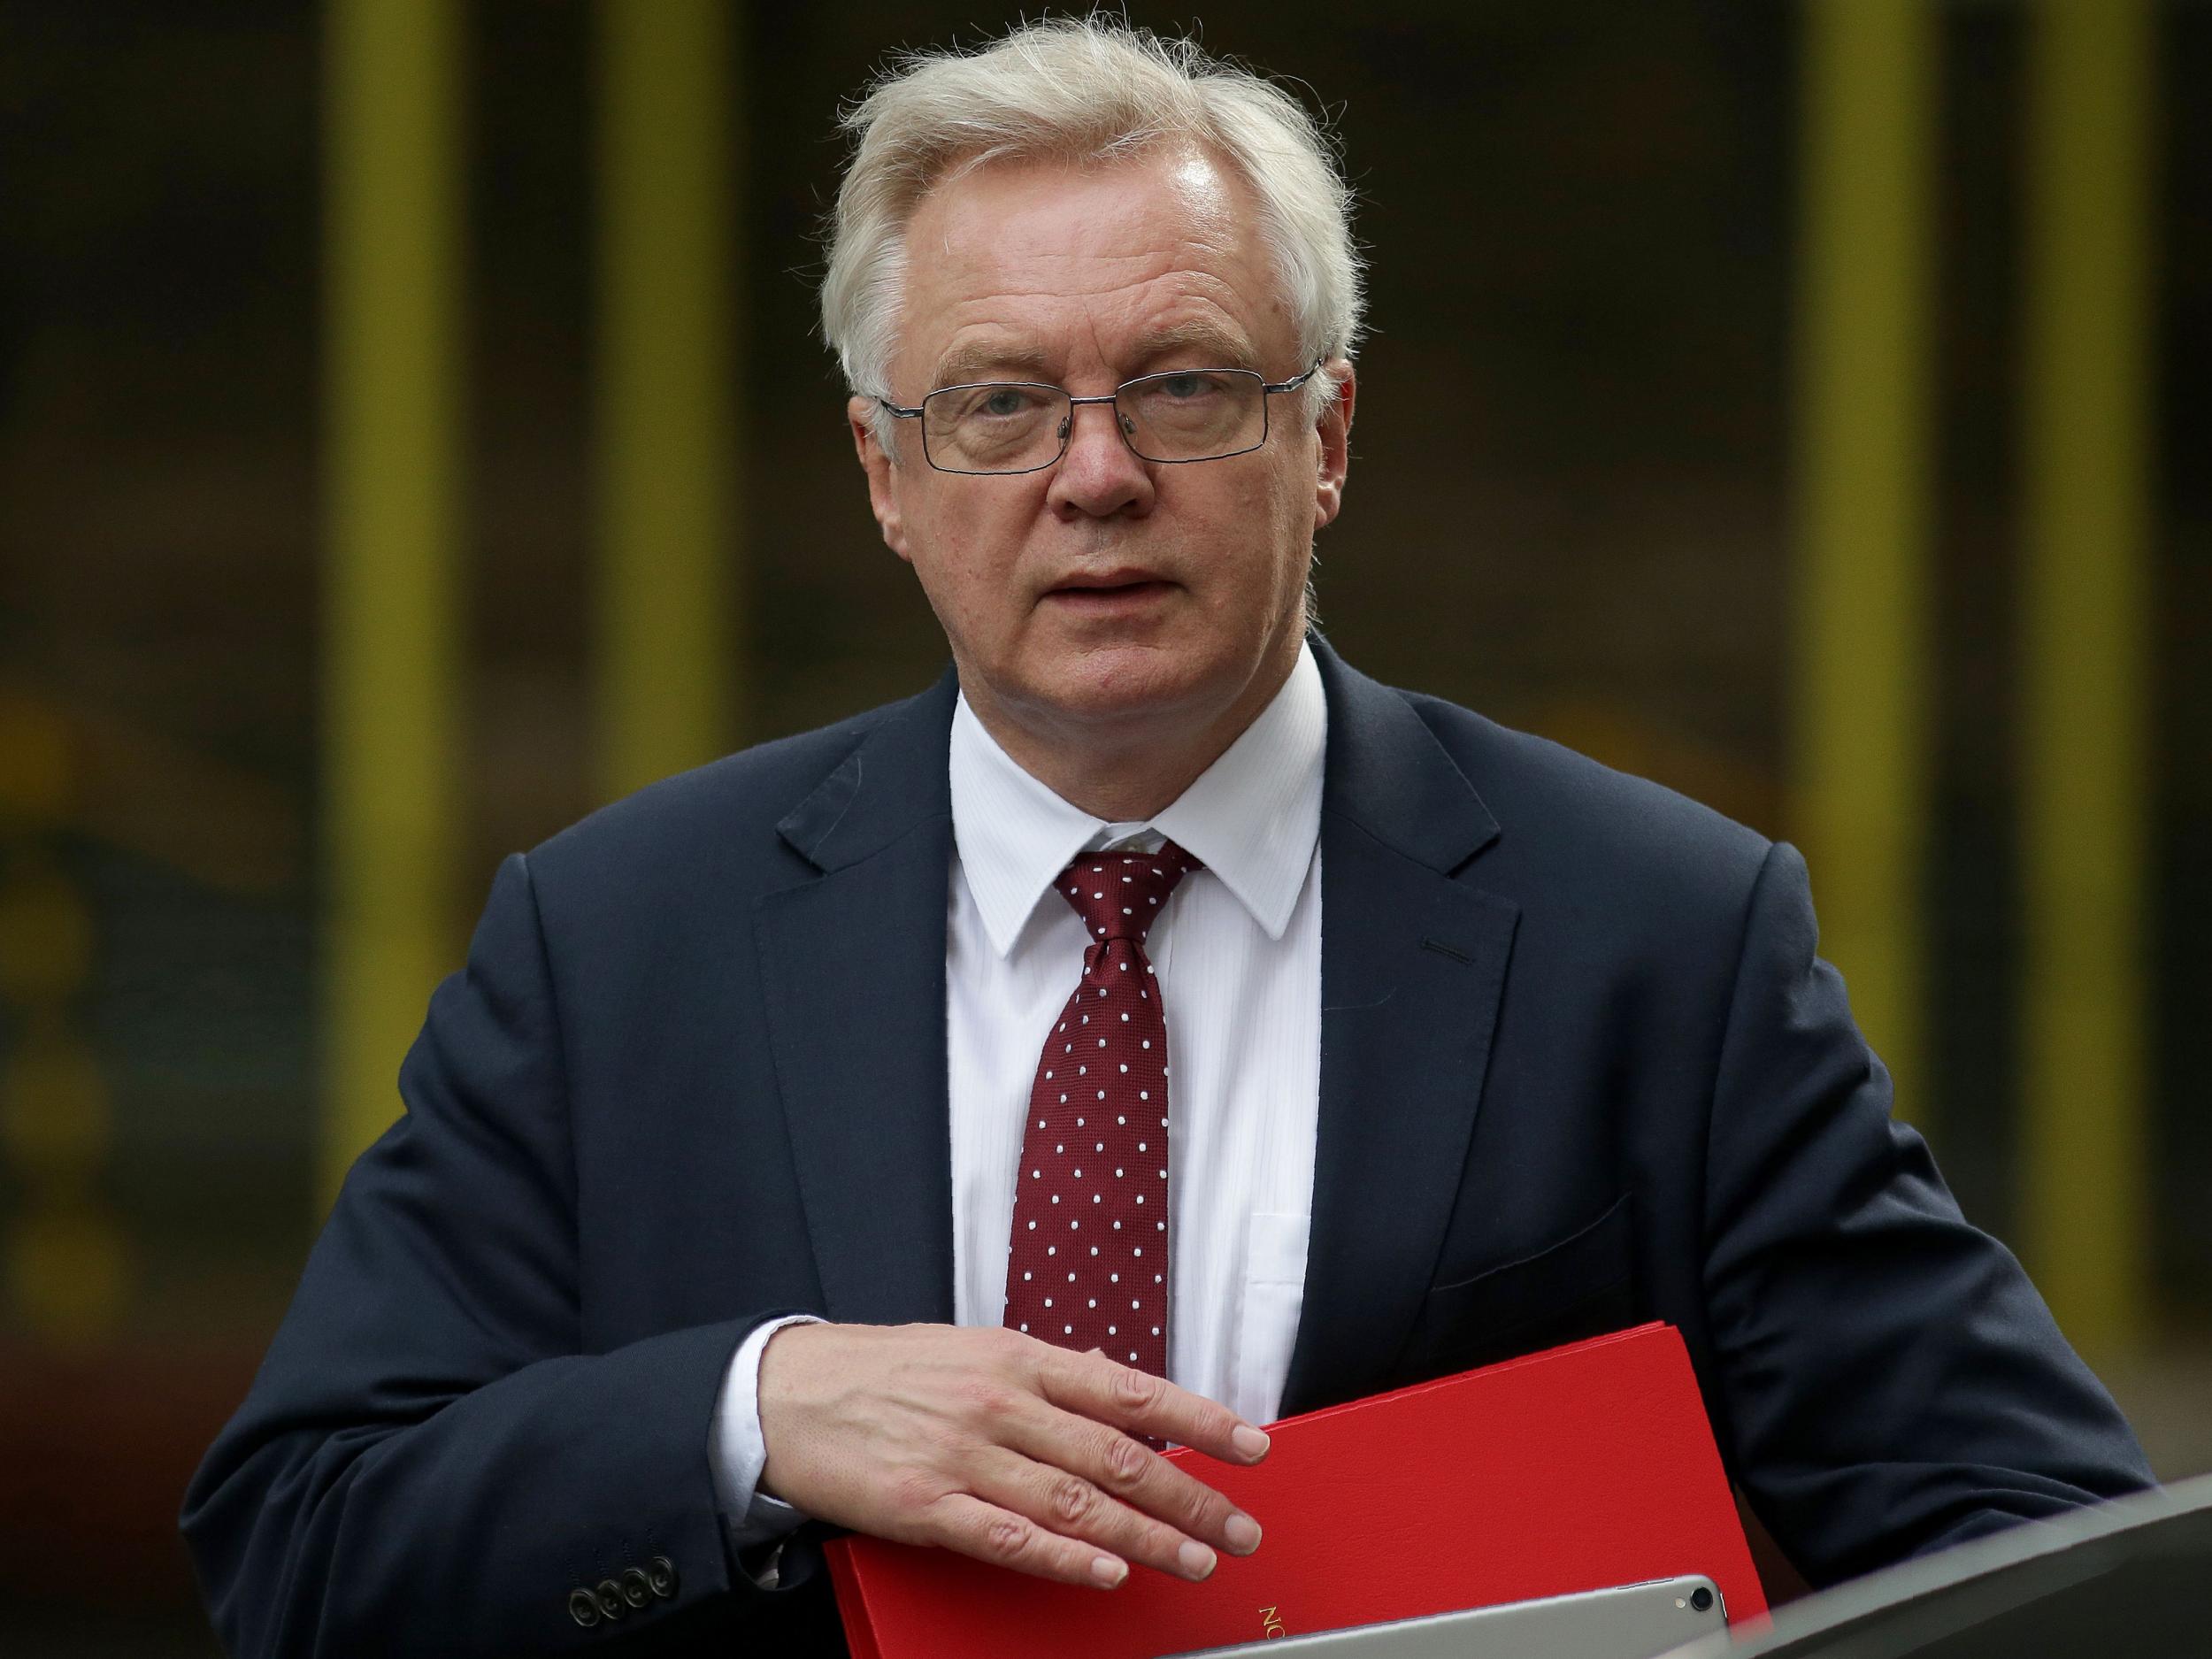 Brexit Secretary in Davis Davis stayed in London on Monday because of parliamentary business